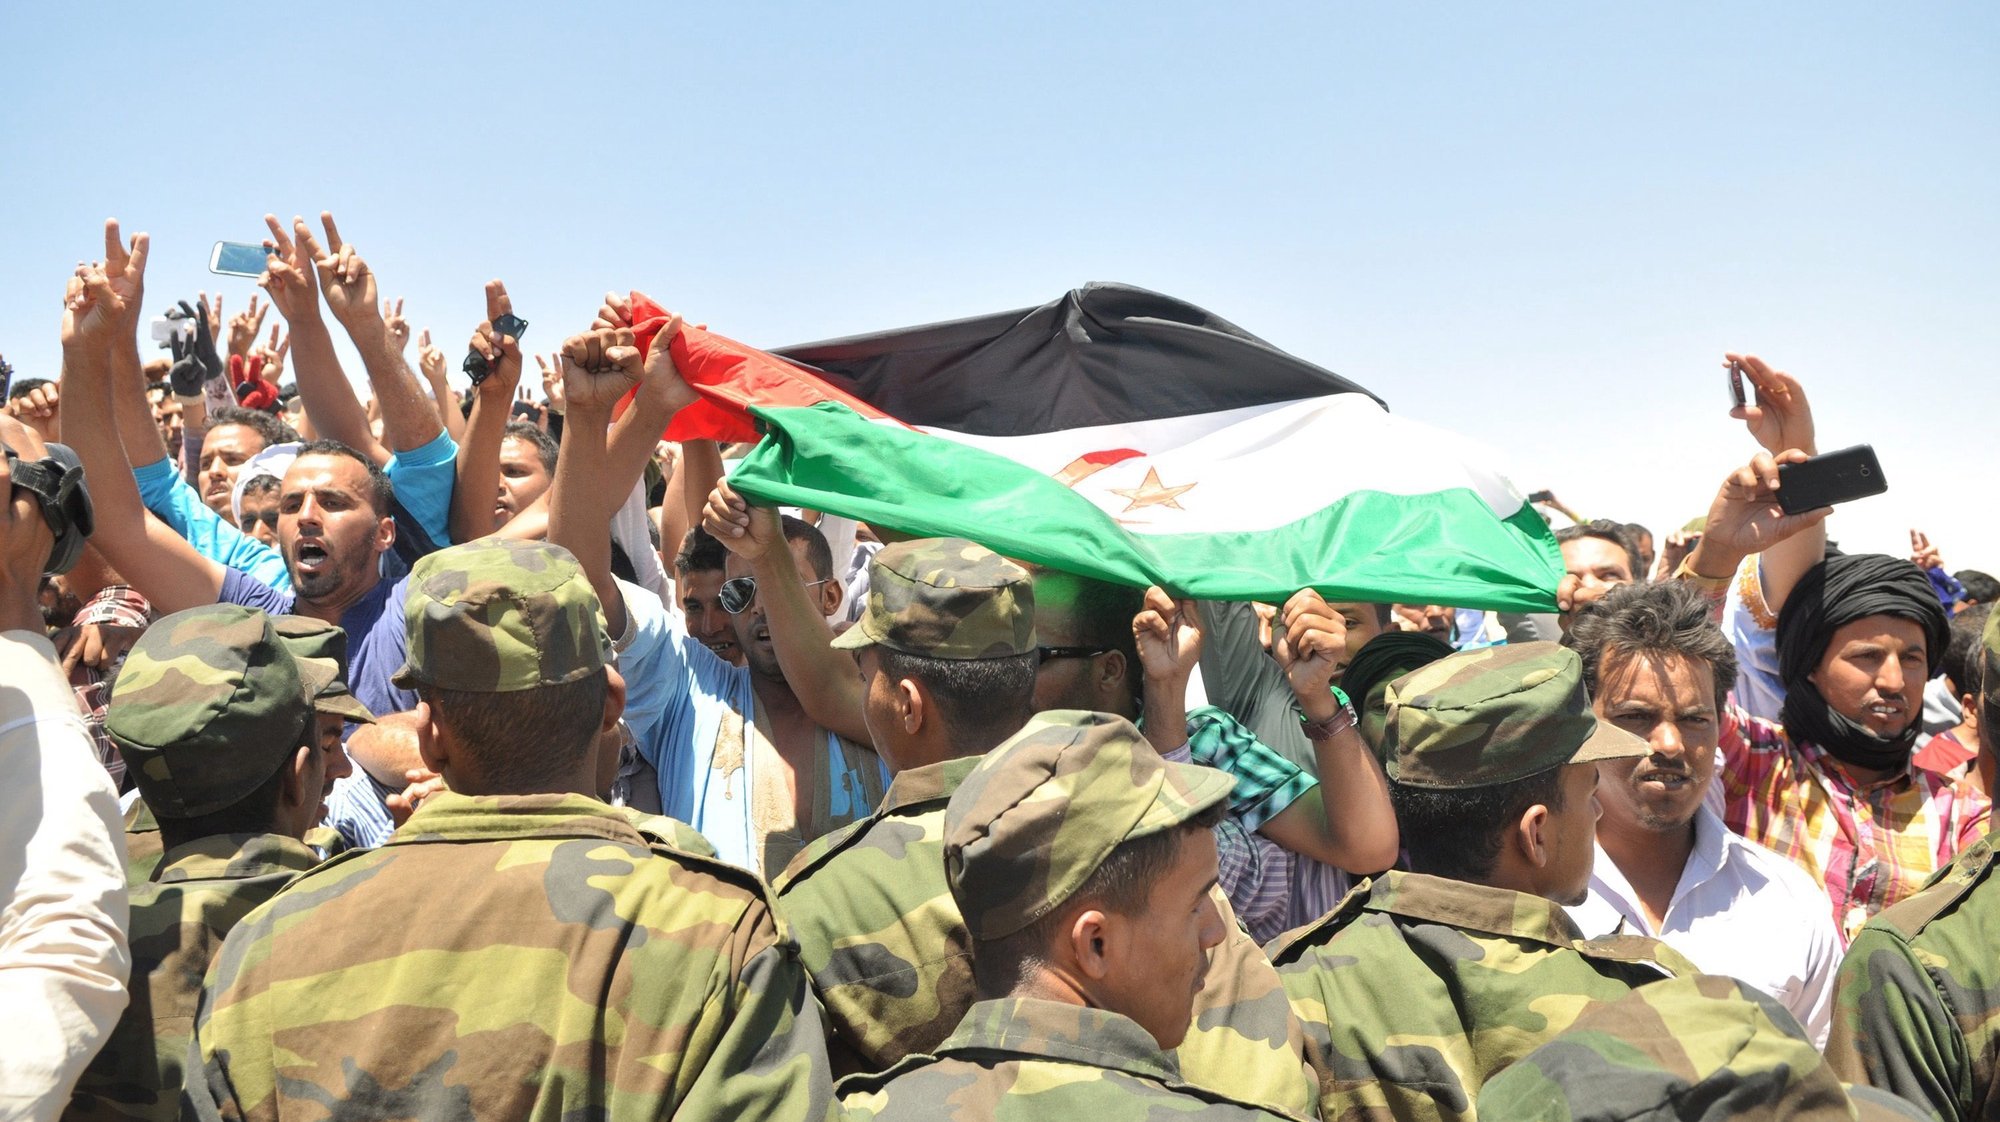 epa05344596 Soldiers and sympathisers gather for a remembrance ceremony of late Sahrawi Mohamed Abdelaziz, President of the Sahrawi Arab Democratic Republic (RASD), at the airport in Tindouf, Algeria, 03 June 2016. Mohamed Abdelaziz, in his late sixties, died after a long battle with illness on 31 May. He was the secretary general of the Polisario Front, a movement fighting for independence of the largely desert region of Western Sahara. The Algerian Prime Minister Abdelmalek Sellal and other member of Algerian government were present to pay their last tribute. Sahrawi&#039;s funeral is expected to take place at Bir Lahlou, a town northeast of Western Sahara, in the area controlled by the Polisario Front, located 236 kilometers from Smara, on 04 June 2016.  EPA/STR